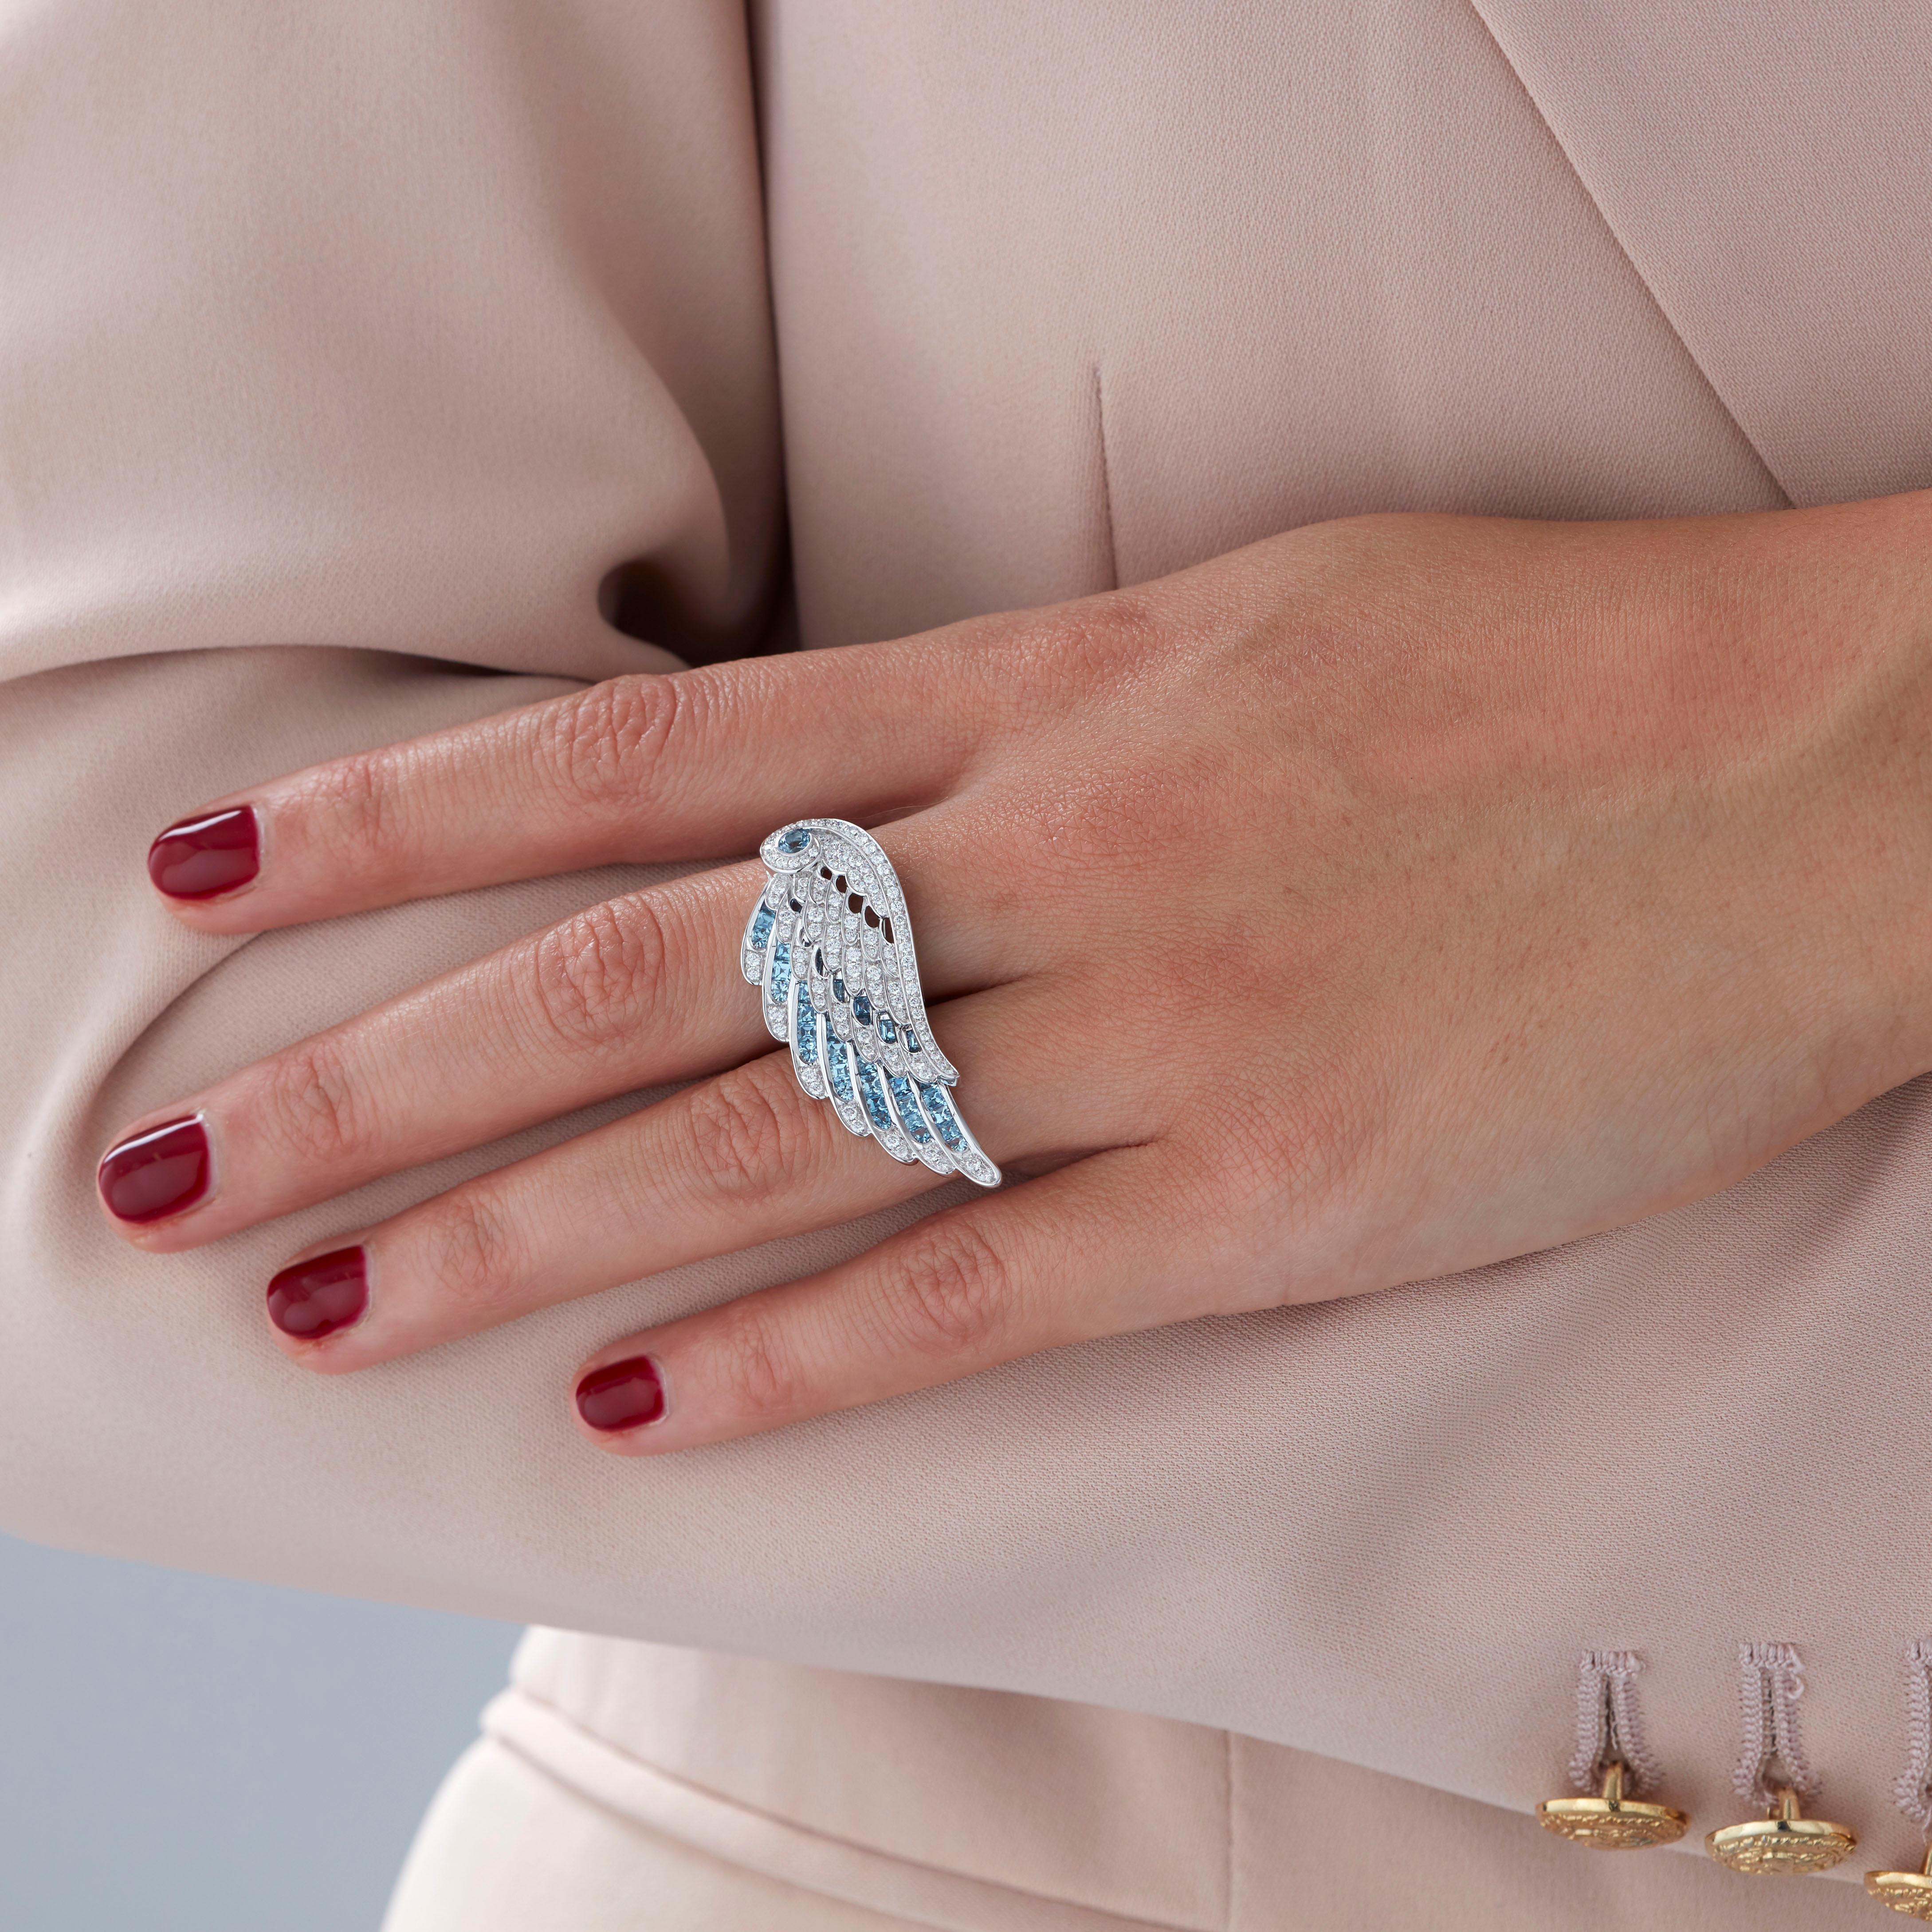 A House of Garrard 18 karat white gold ring from the 'Wings Embrace' collection, set with round white diamonds and round and calibre cut aquamarines. 

106 round white diamonds weighing: 0.78cts
1 round aquamarine weighing: 0.13cts
42 calibre cut